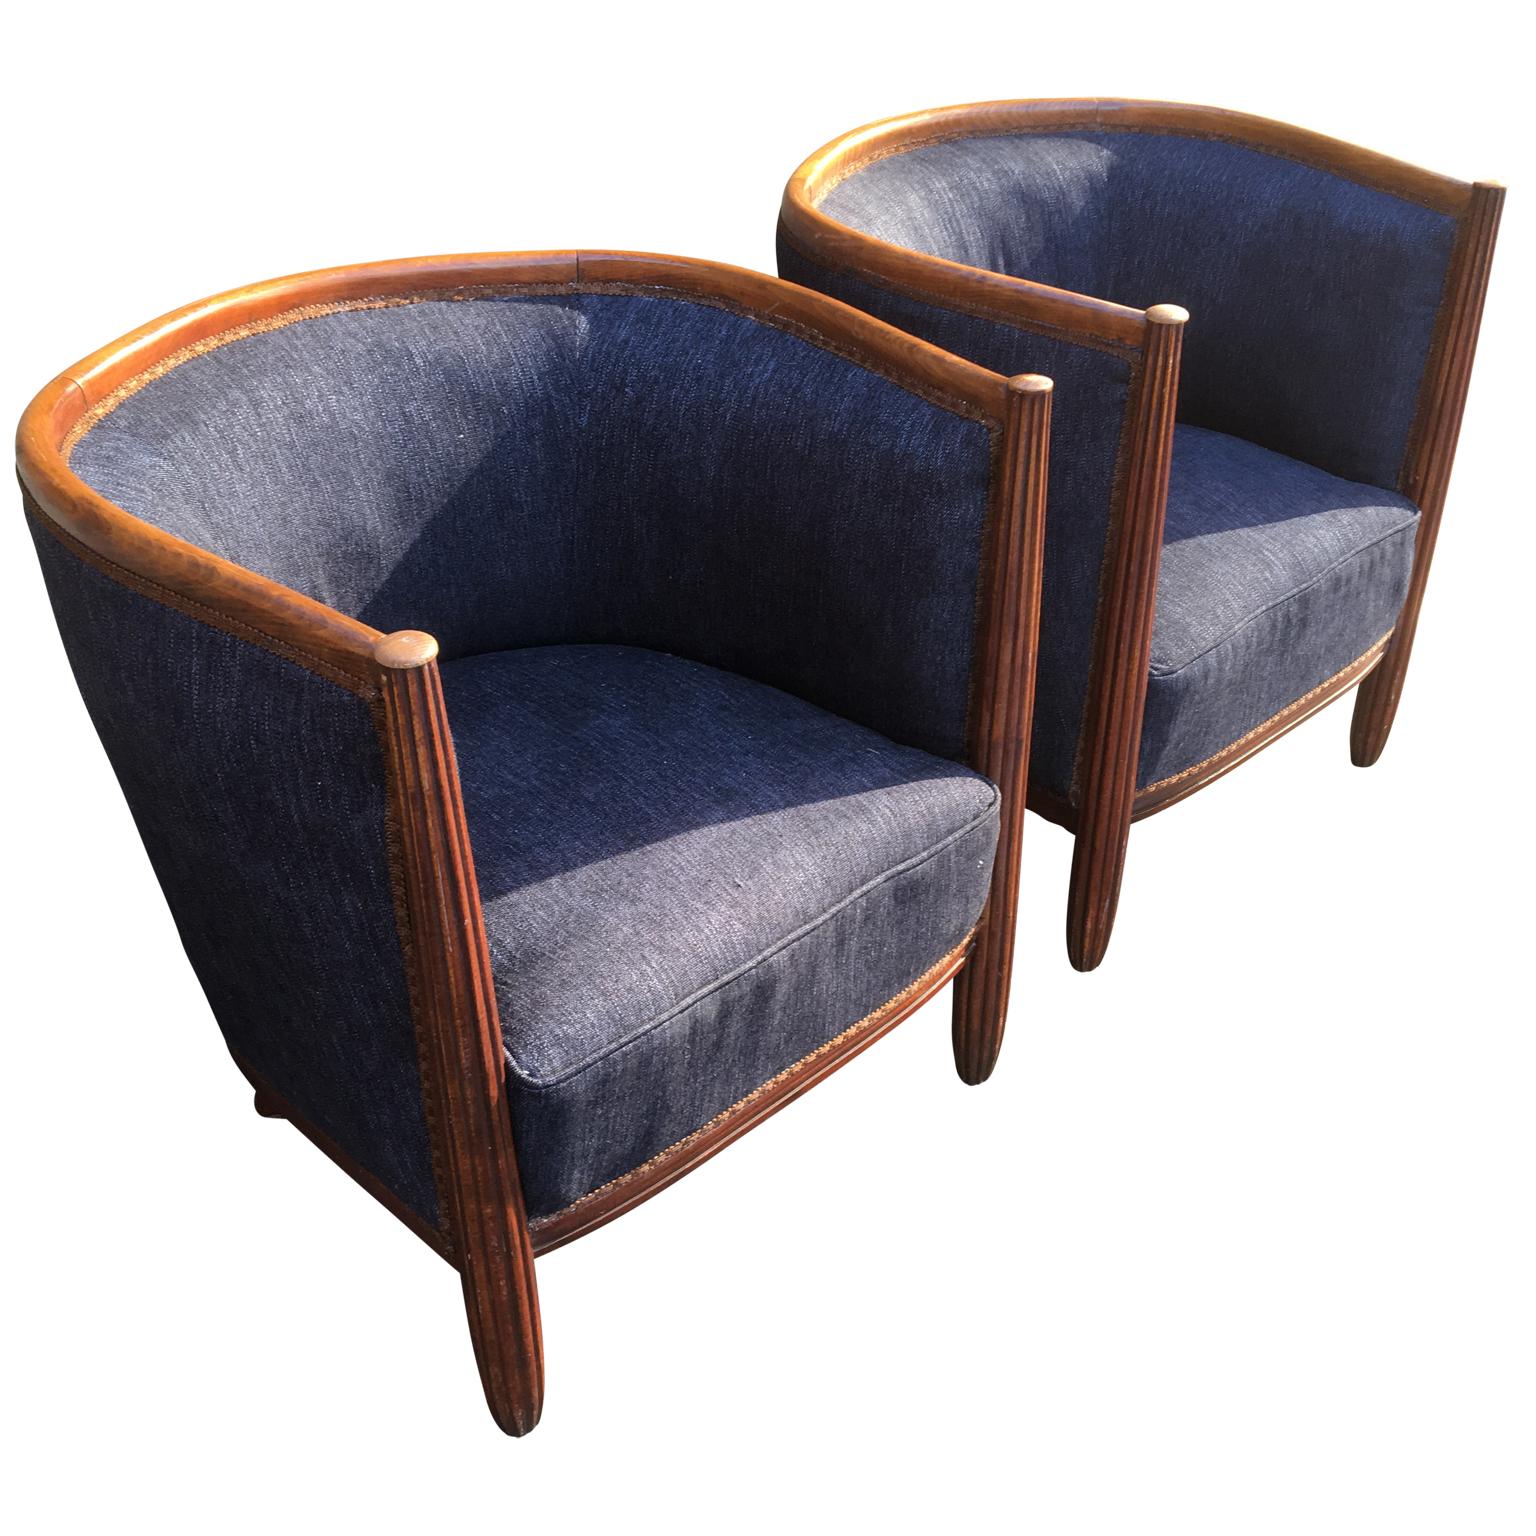 Pair of French Art Deco barrel club chairs.

